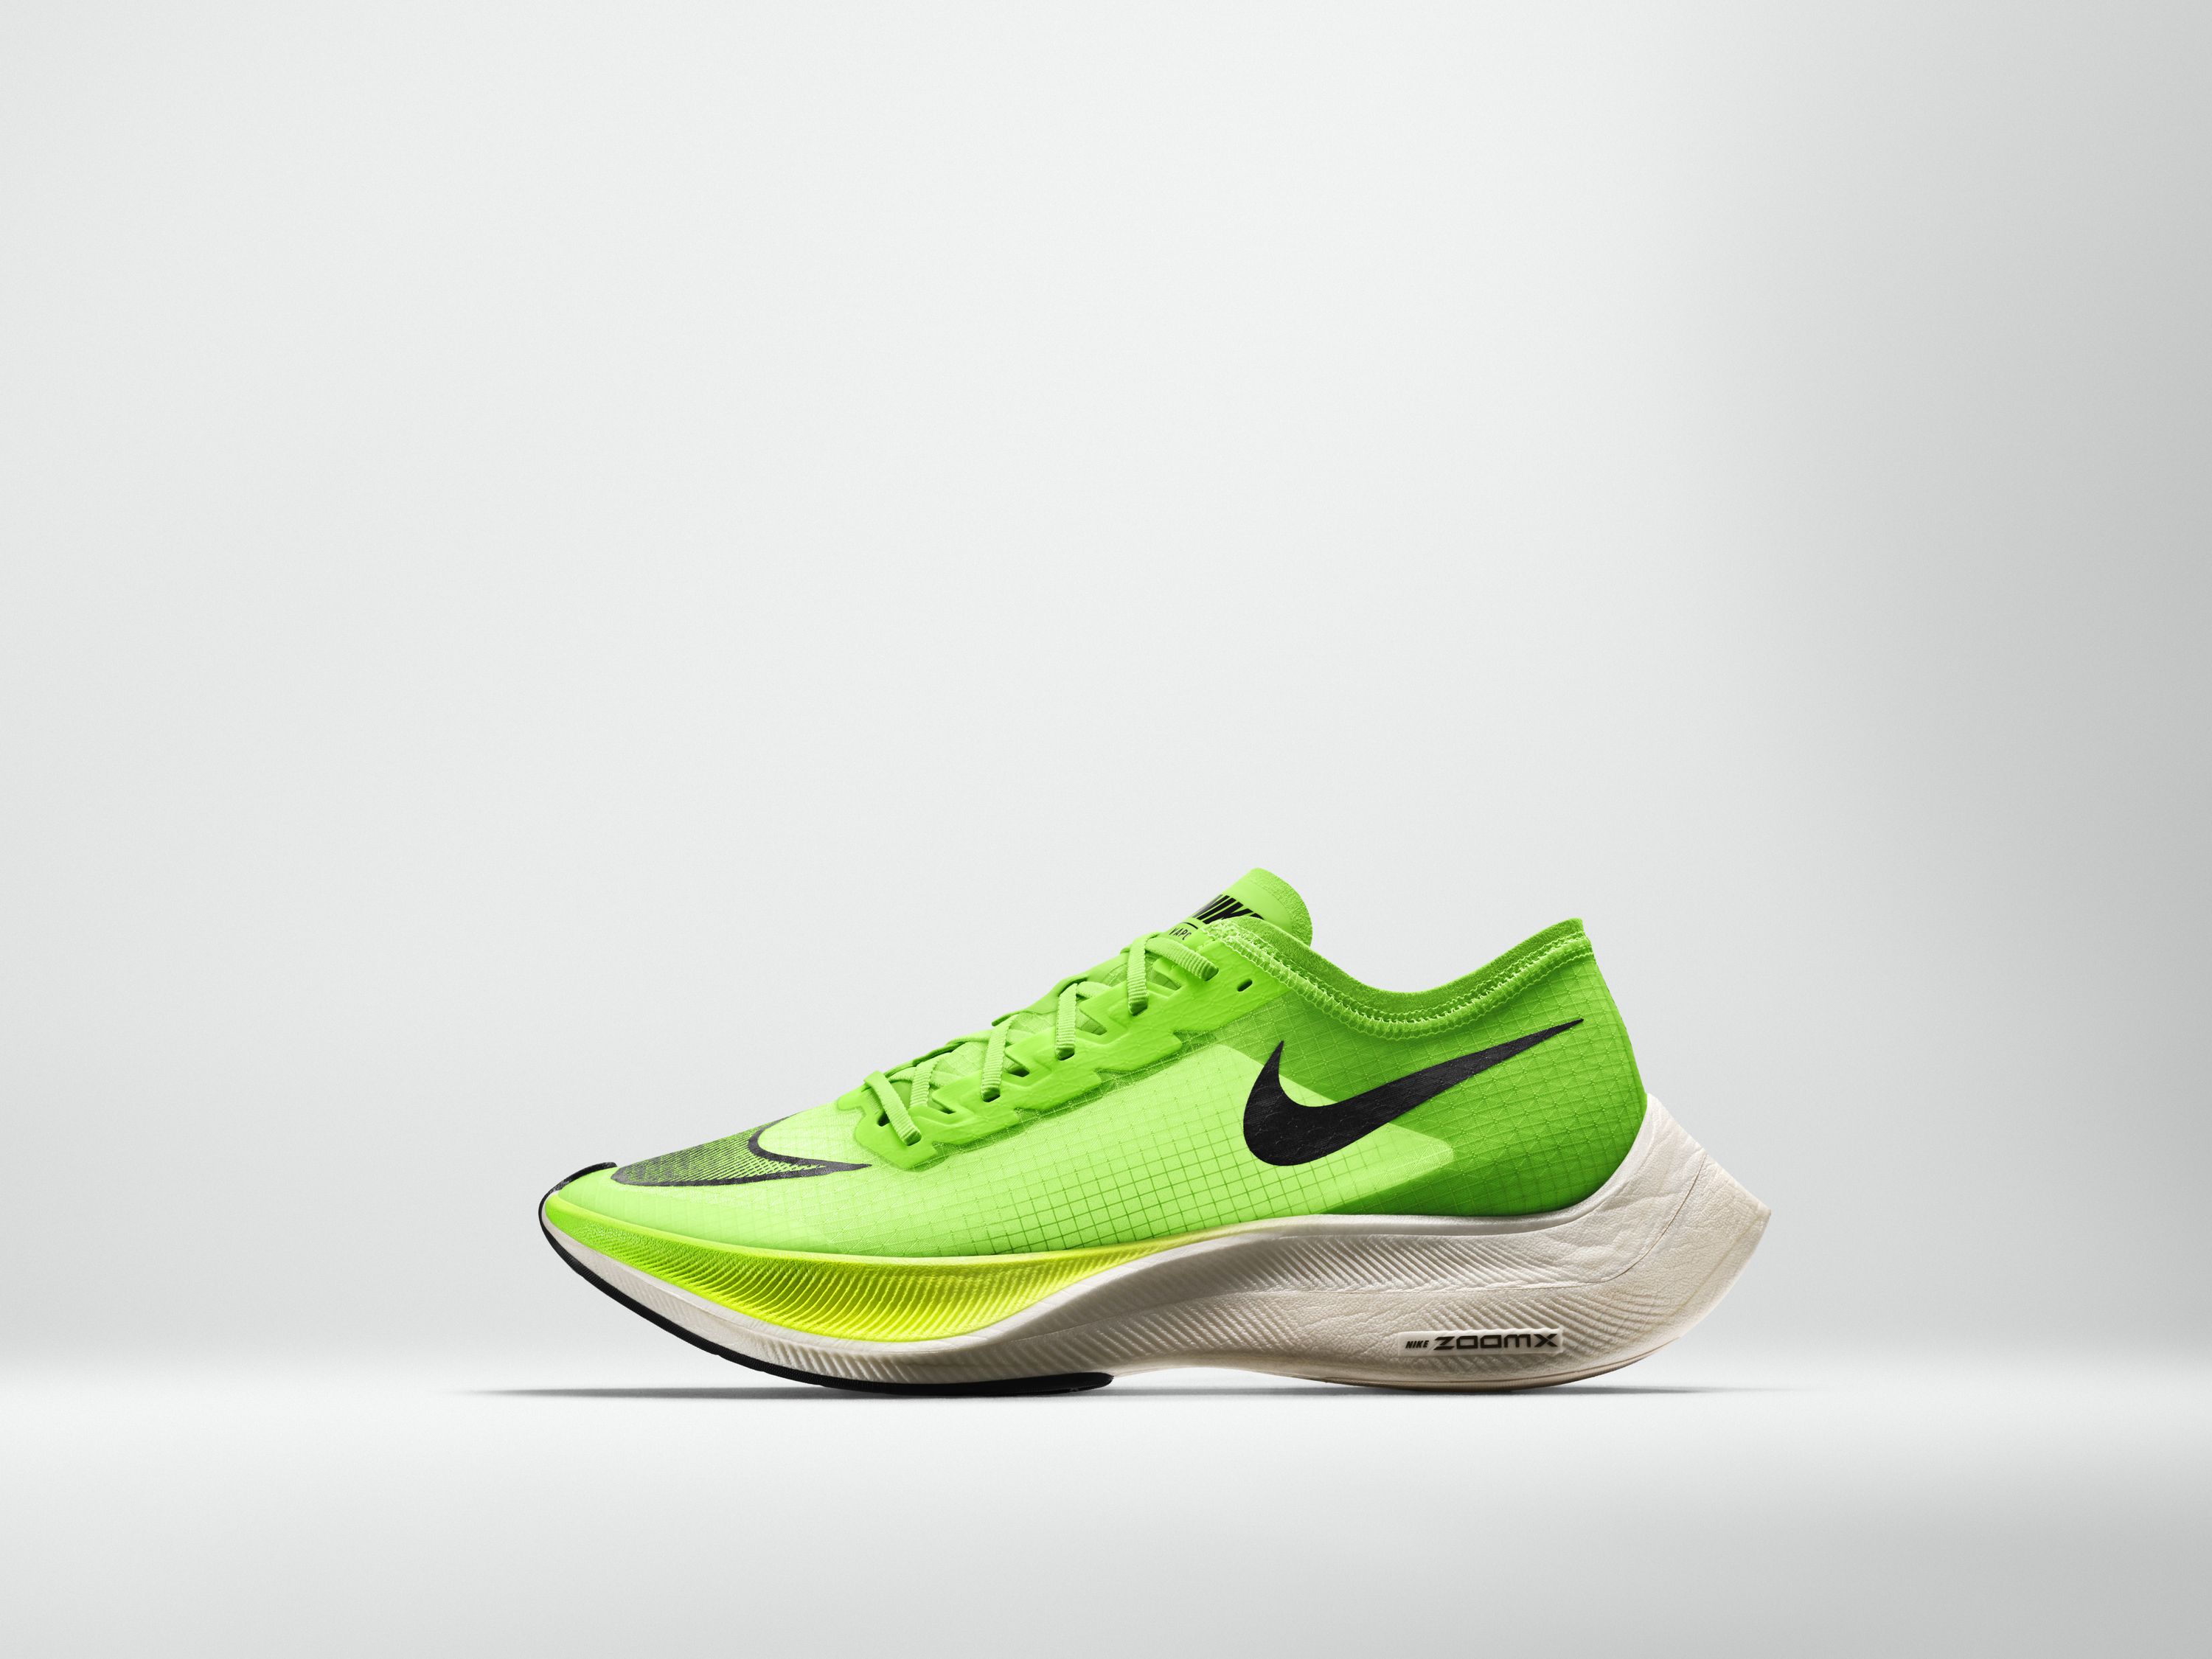 Nike the ZoomX Vaporfly NEXT% running